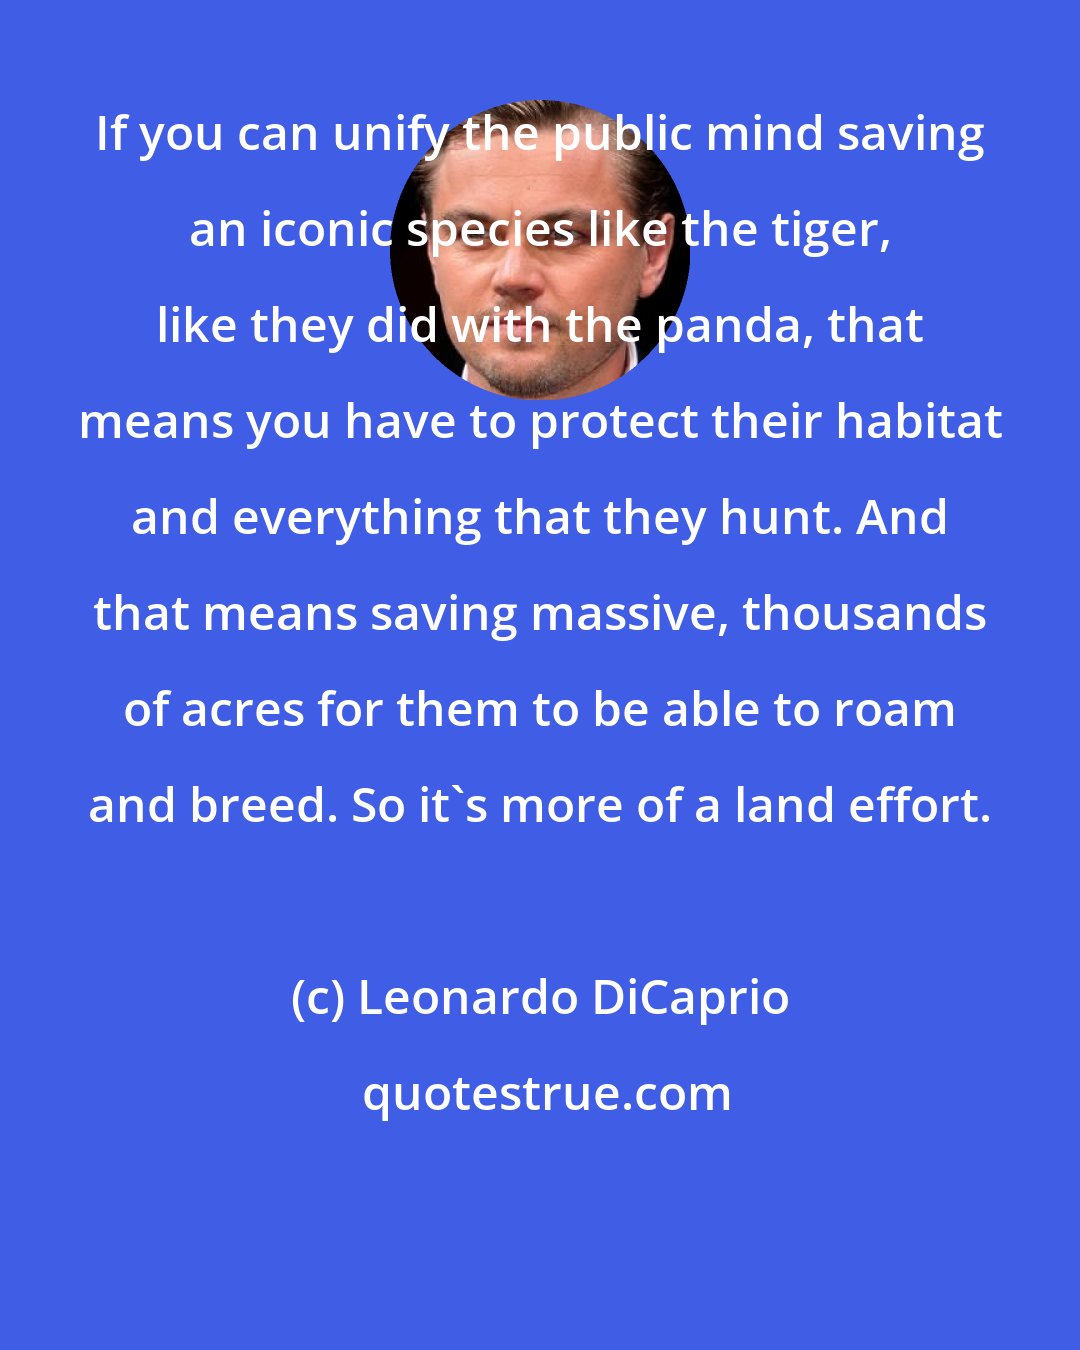 Leonardo DiCaprio: If you can unify the public mind saving an iconic species like the tiger, like they did with the panda, that means you have to protect their habitat and everything that they hunt. And that means saving massive, thousands of acres for them to be able to roam and breed. So it's more of a land effort.